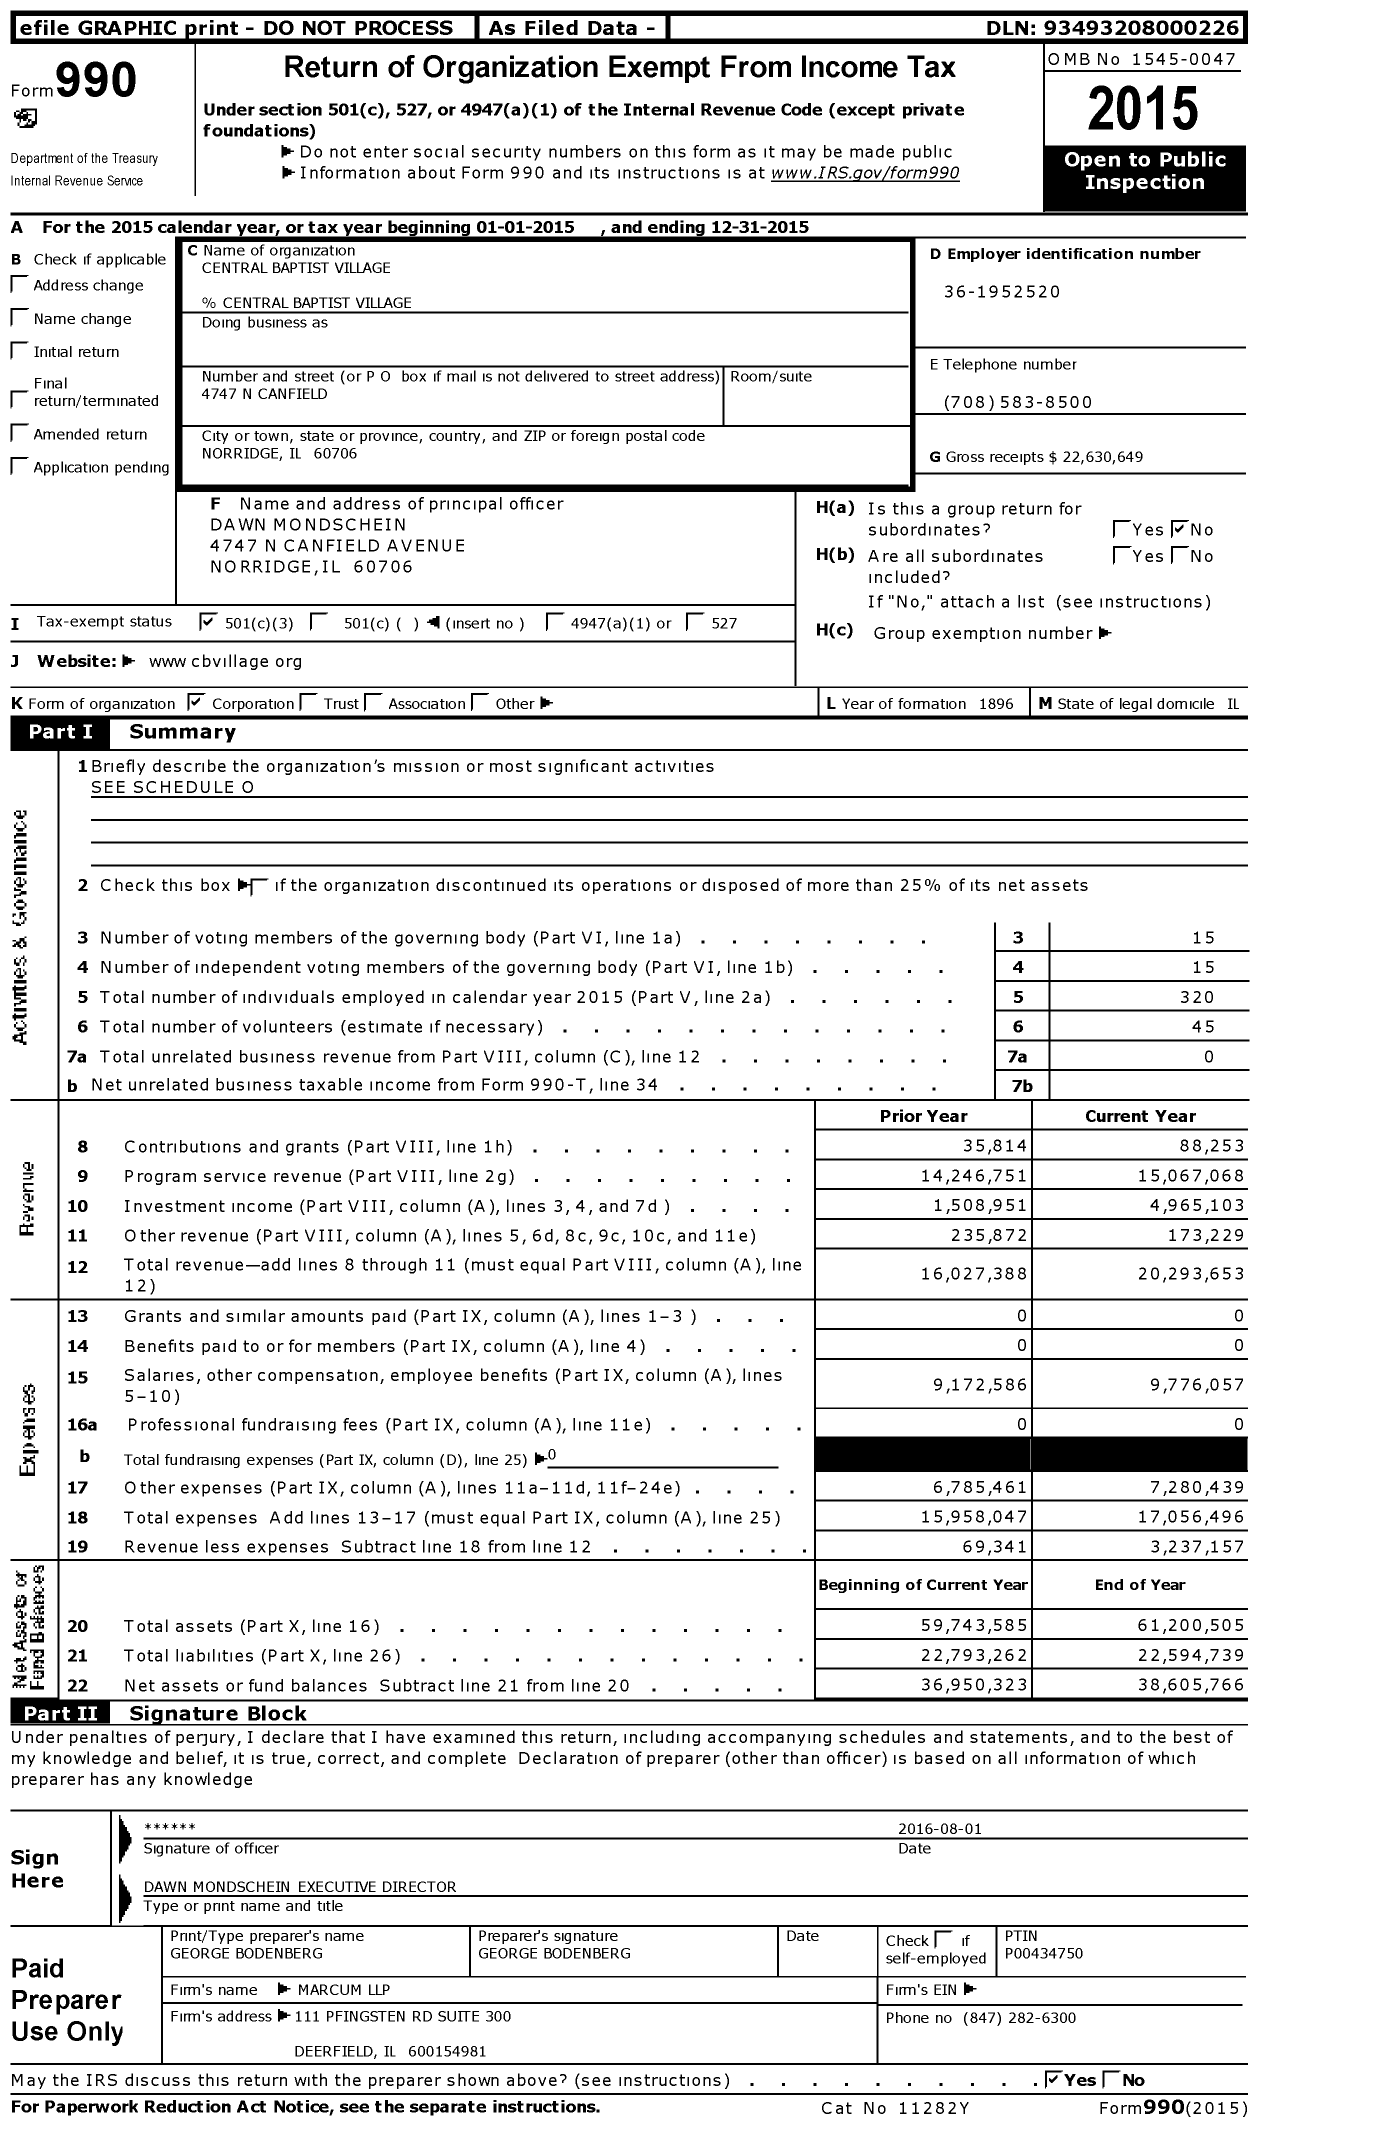 Image of first page of 2015 Form 990 for Central Baptist Village (CBV)